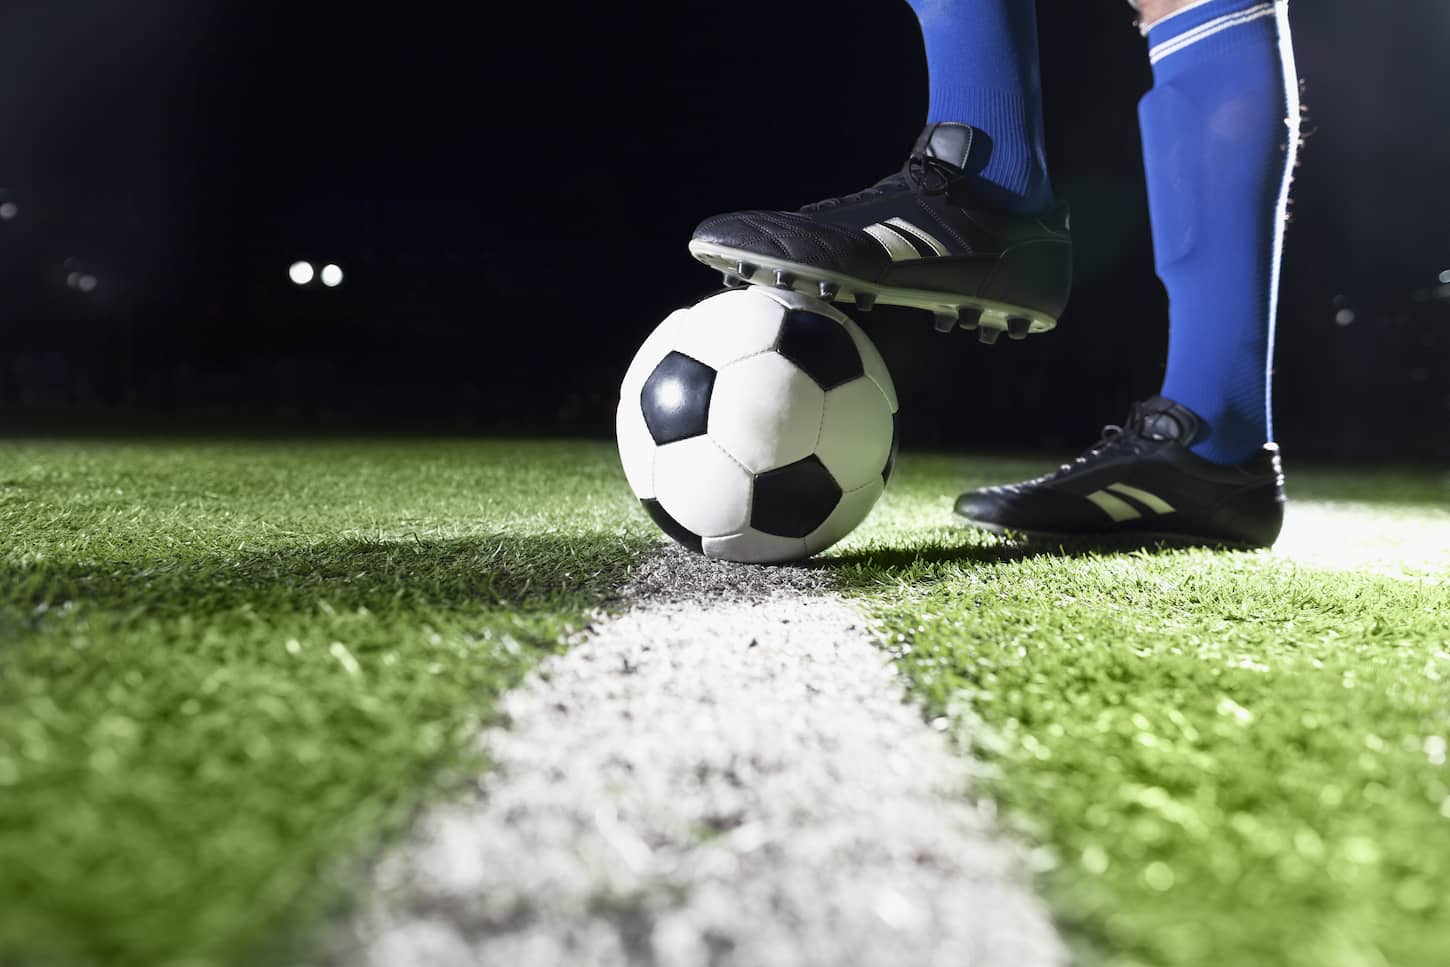 An image of a Foot on a soccer ball on the field.